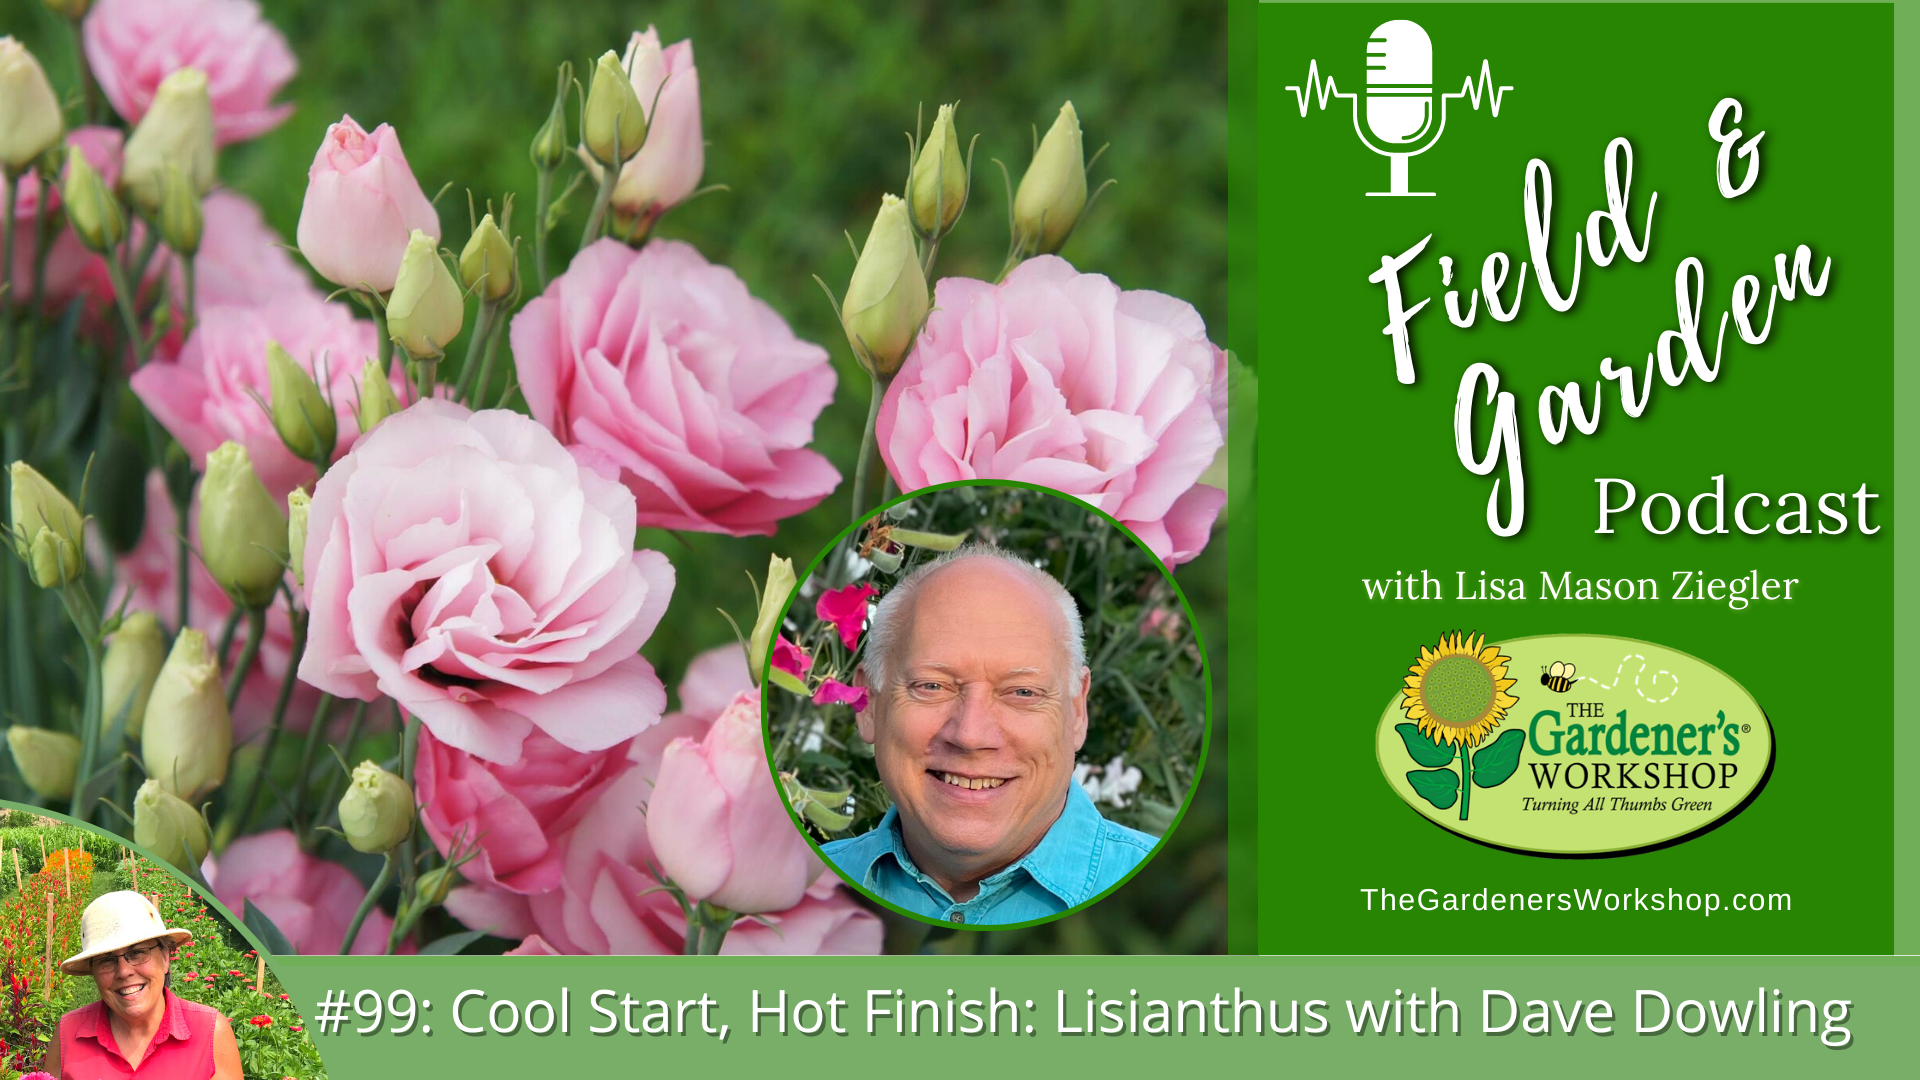 #99: Cool Start, Hot Finish: Lisianthus with Dave Dowling